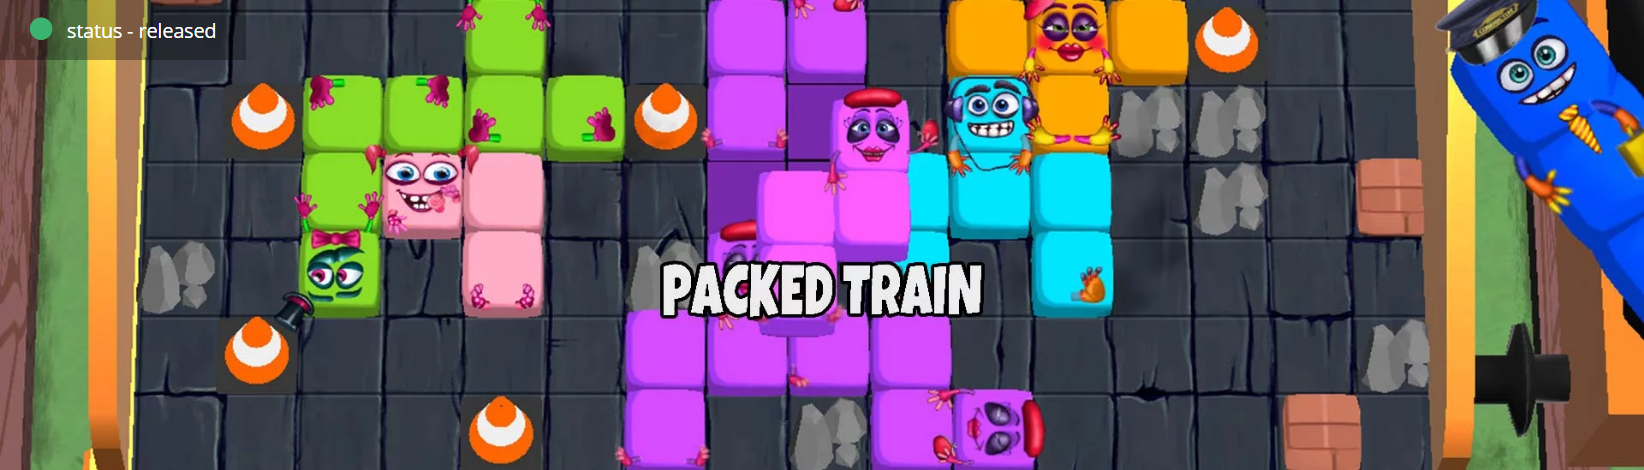 Screenshot_2019-09-27 Packed Train Indiegala Developers.png